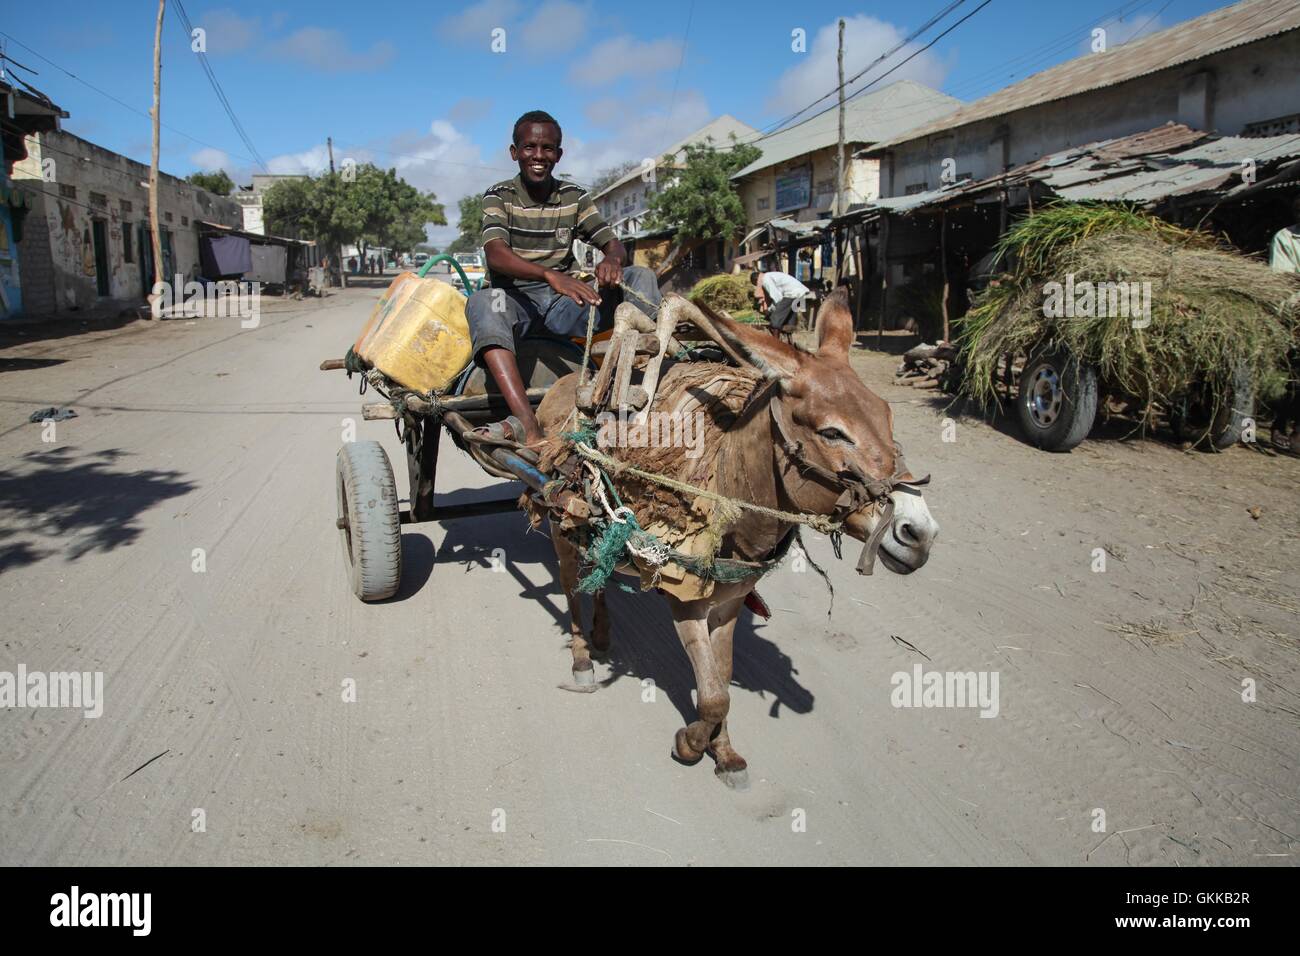 SOMALIA, Kismayo: In a photogaph taken 12 October 2013 and released by the African Union-United Nations Information Support Team 15 October, a man rides a donkey-drawn cart down a street during a patrol by Kenyan soldiers serving with the African Union Mission in Somalia (AMISOM) in the southern Somali port city of Kismayo. October 16 marks two years since the Kenya Defense Force first intervened in Somalia under Operation Linda Nchi - meaning Operation Protect the Country in Kiswahili - following a series of kidnappings and cross-border raids along the Kenya-Somalia border by the Al-Qaeda-aff Stock Photo